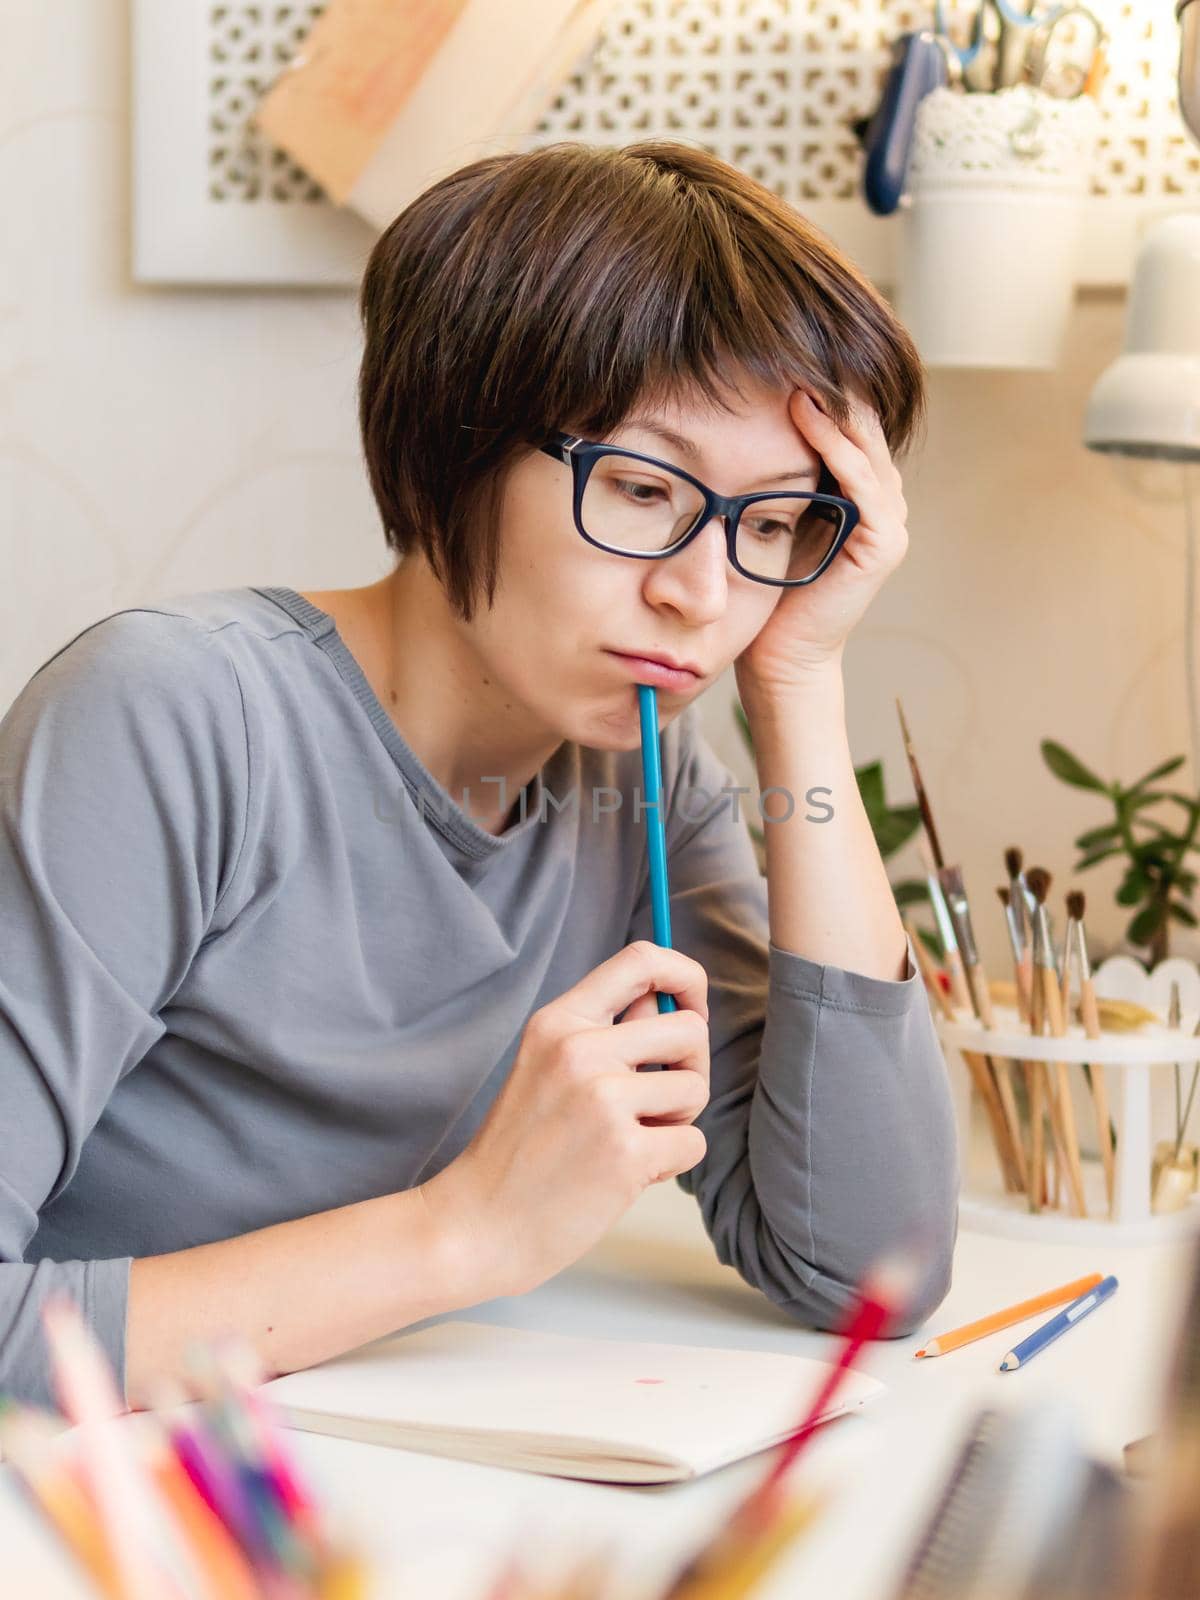 Woman with short hair cut is drawing in notebook. Calming hobby, antistress leisure. Artist at work. Cozy workplace.